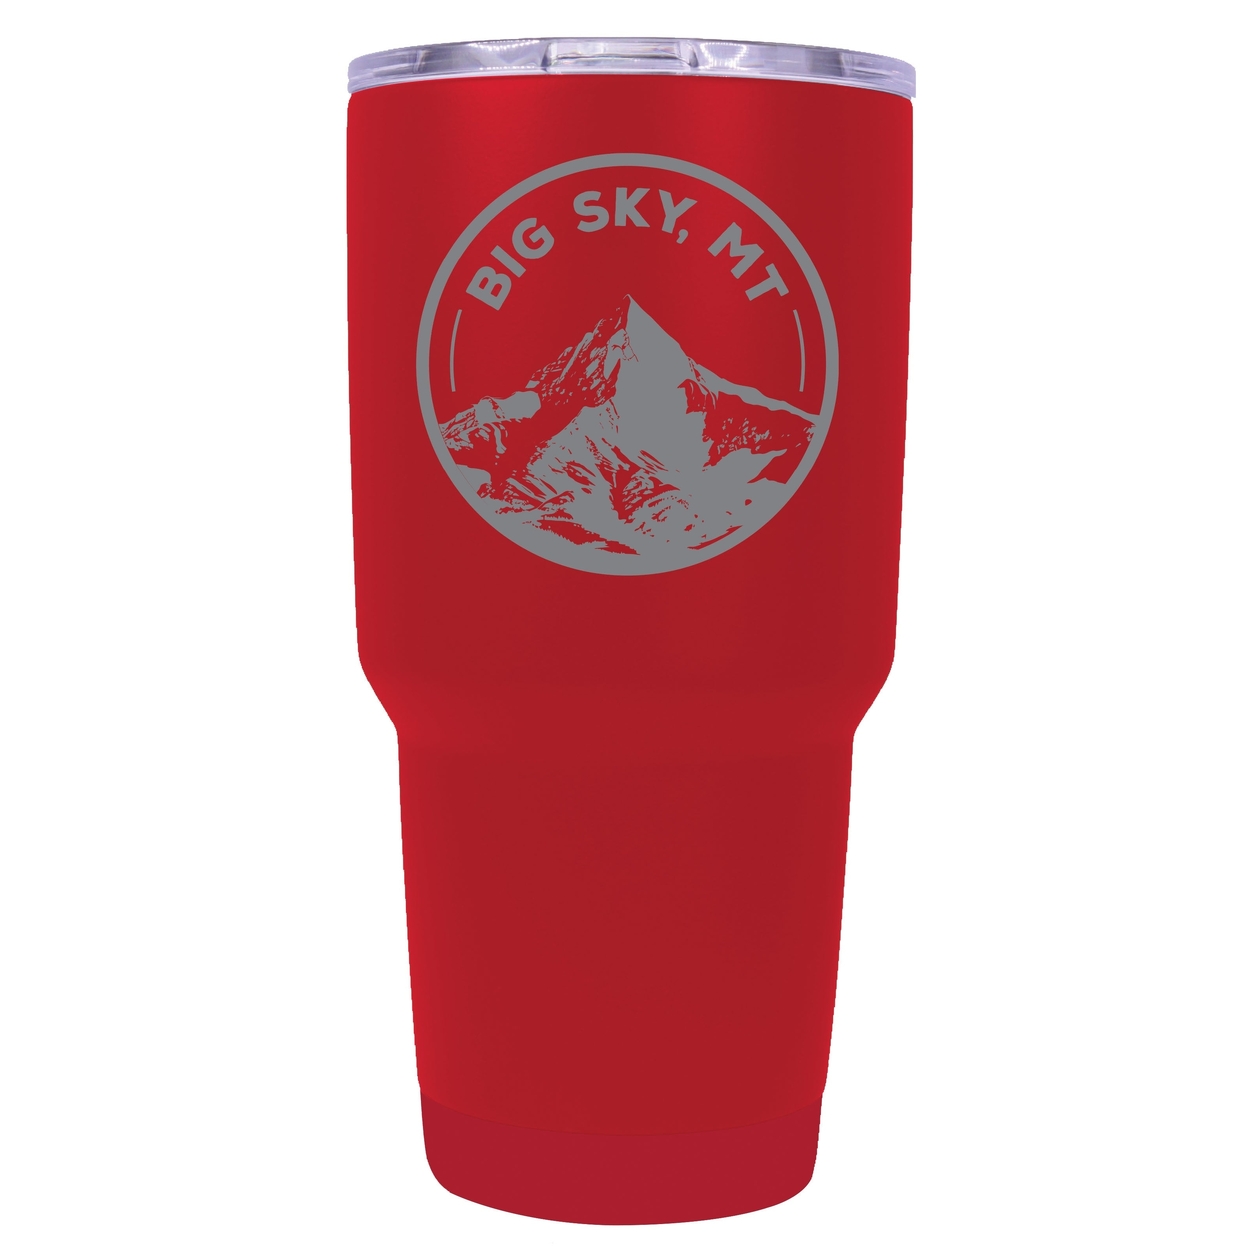 Big Sky Montana Souvenir 24 Oz Engraved Insulated Stainless Steel Tumbler - Navy,,2-Pack